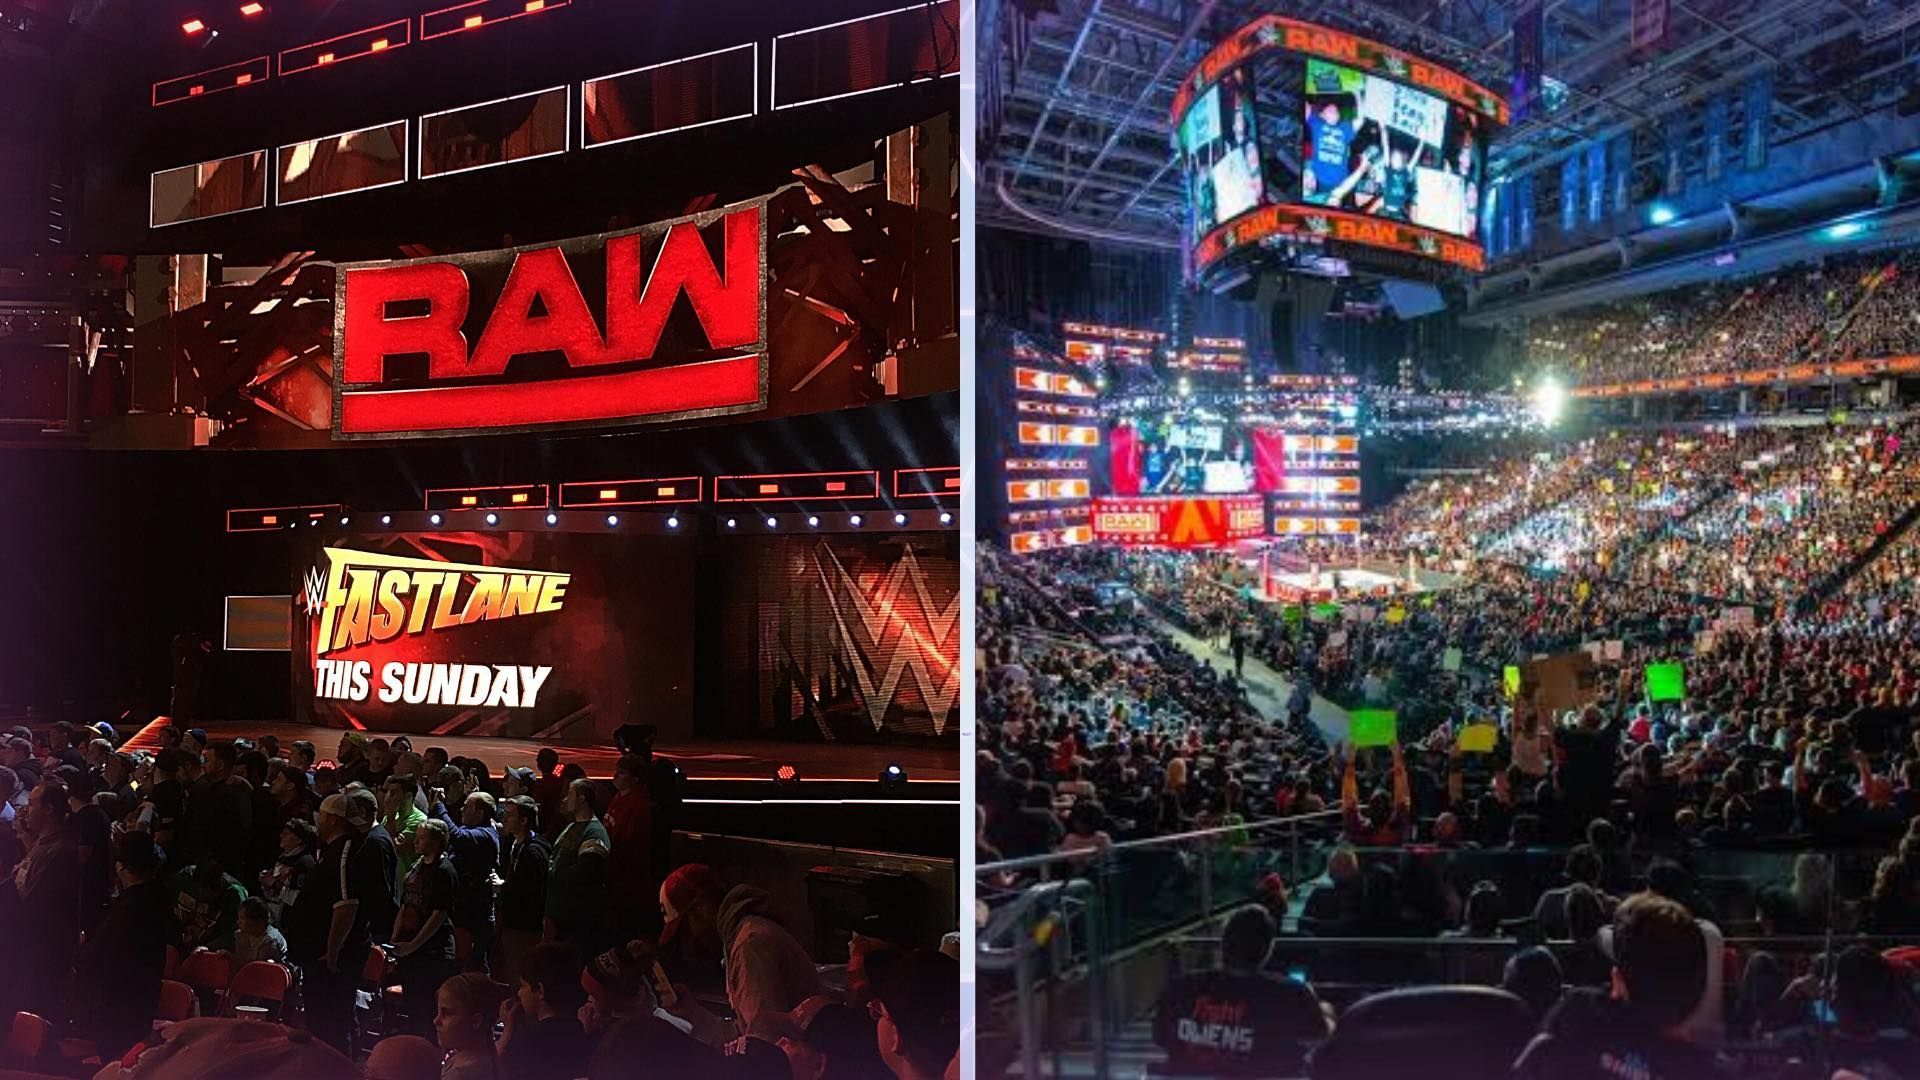 WWE RAW this week was live from the Bridgestone Arena in Nashville, Tennessee